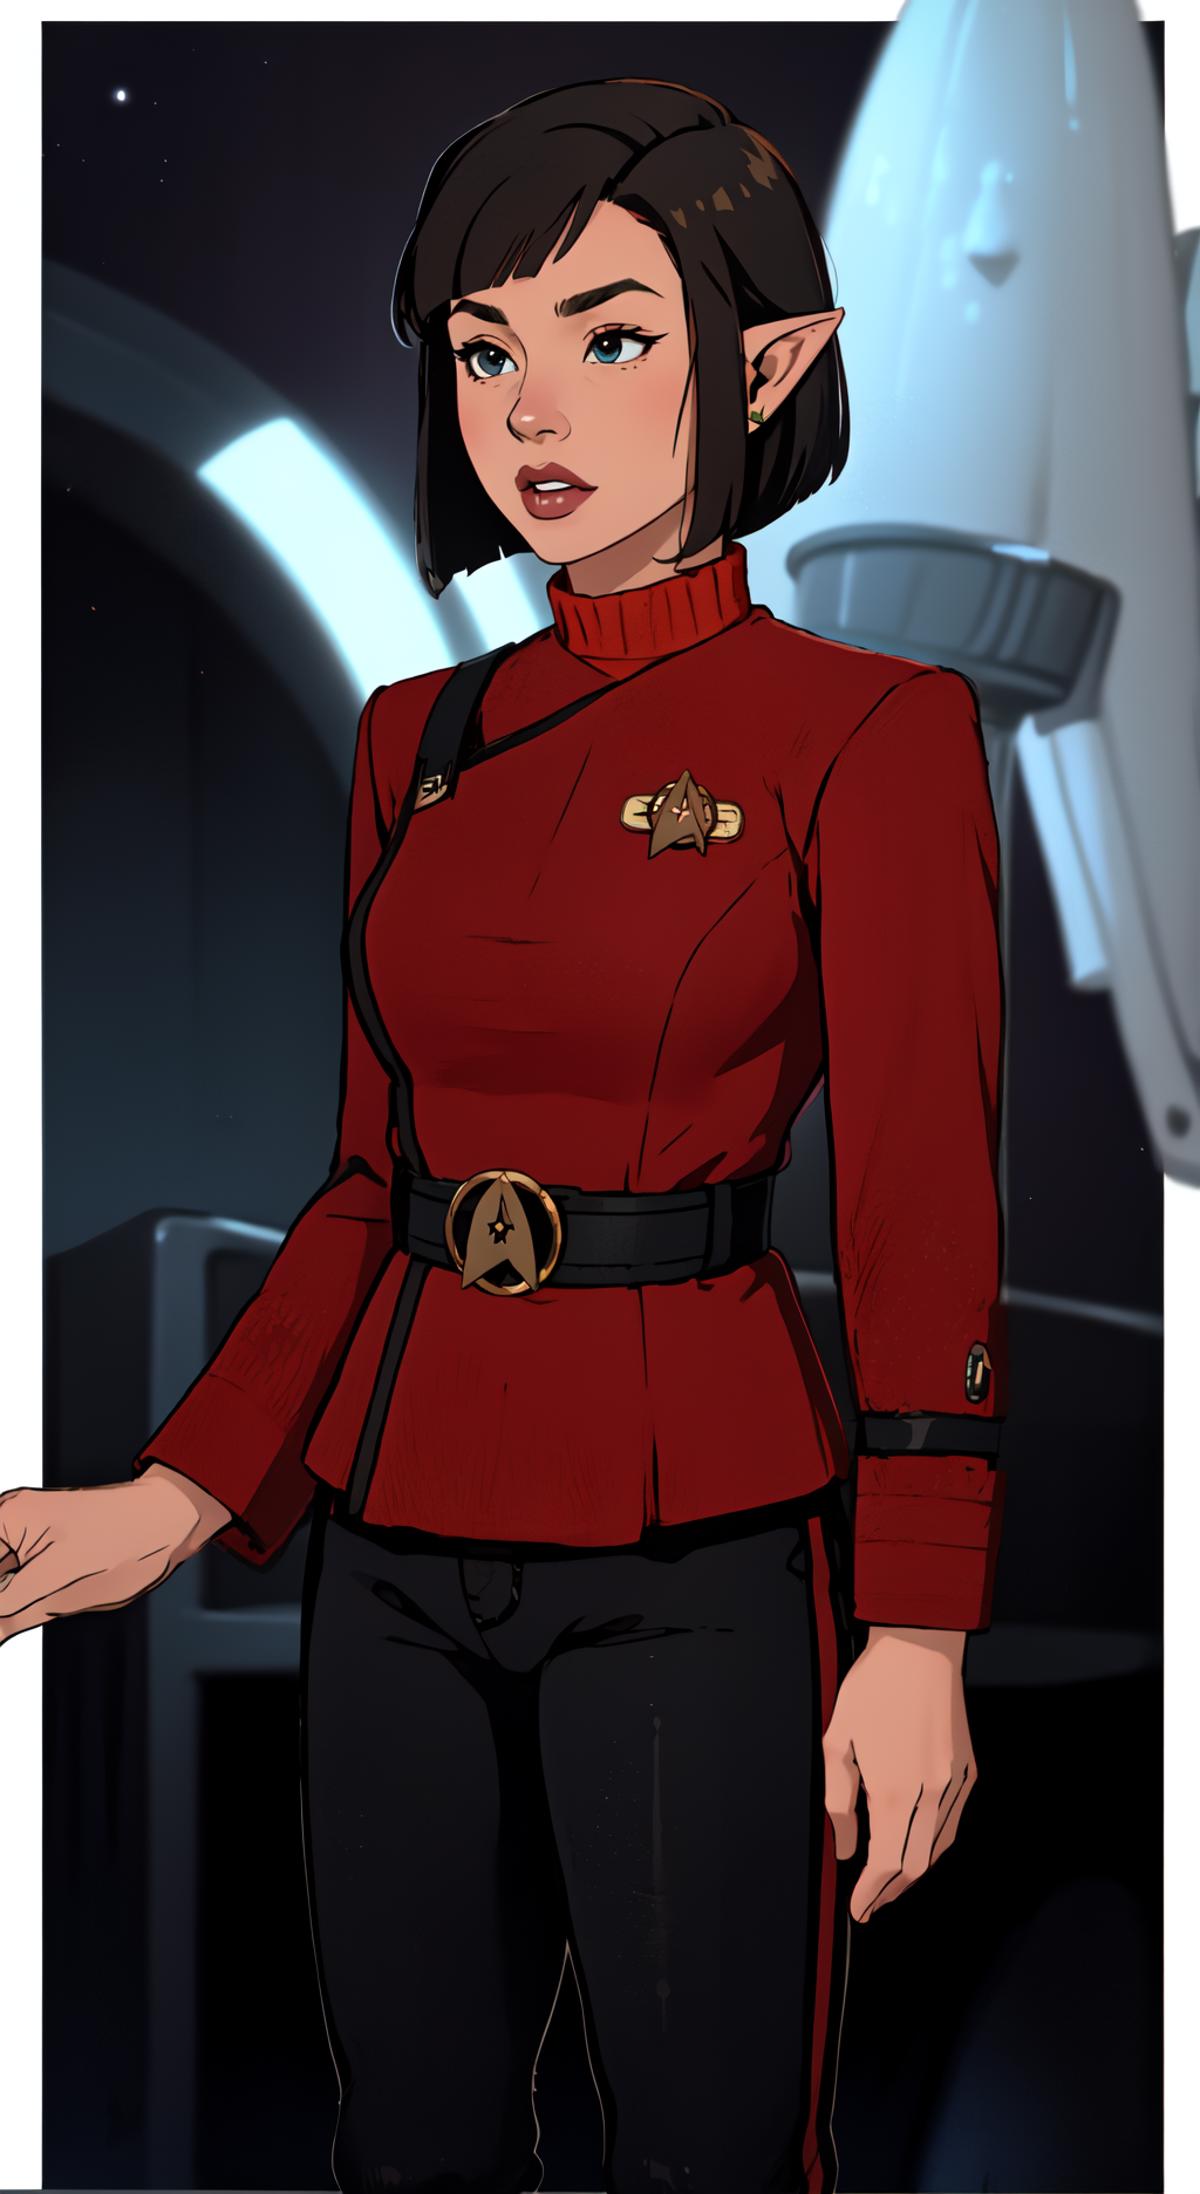 Star Trek TWoK uniforms image by impossiblebearcl4060